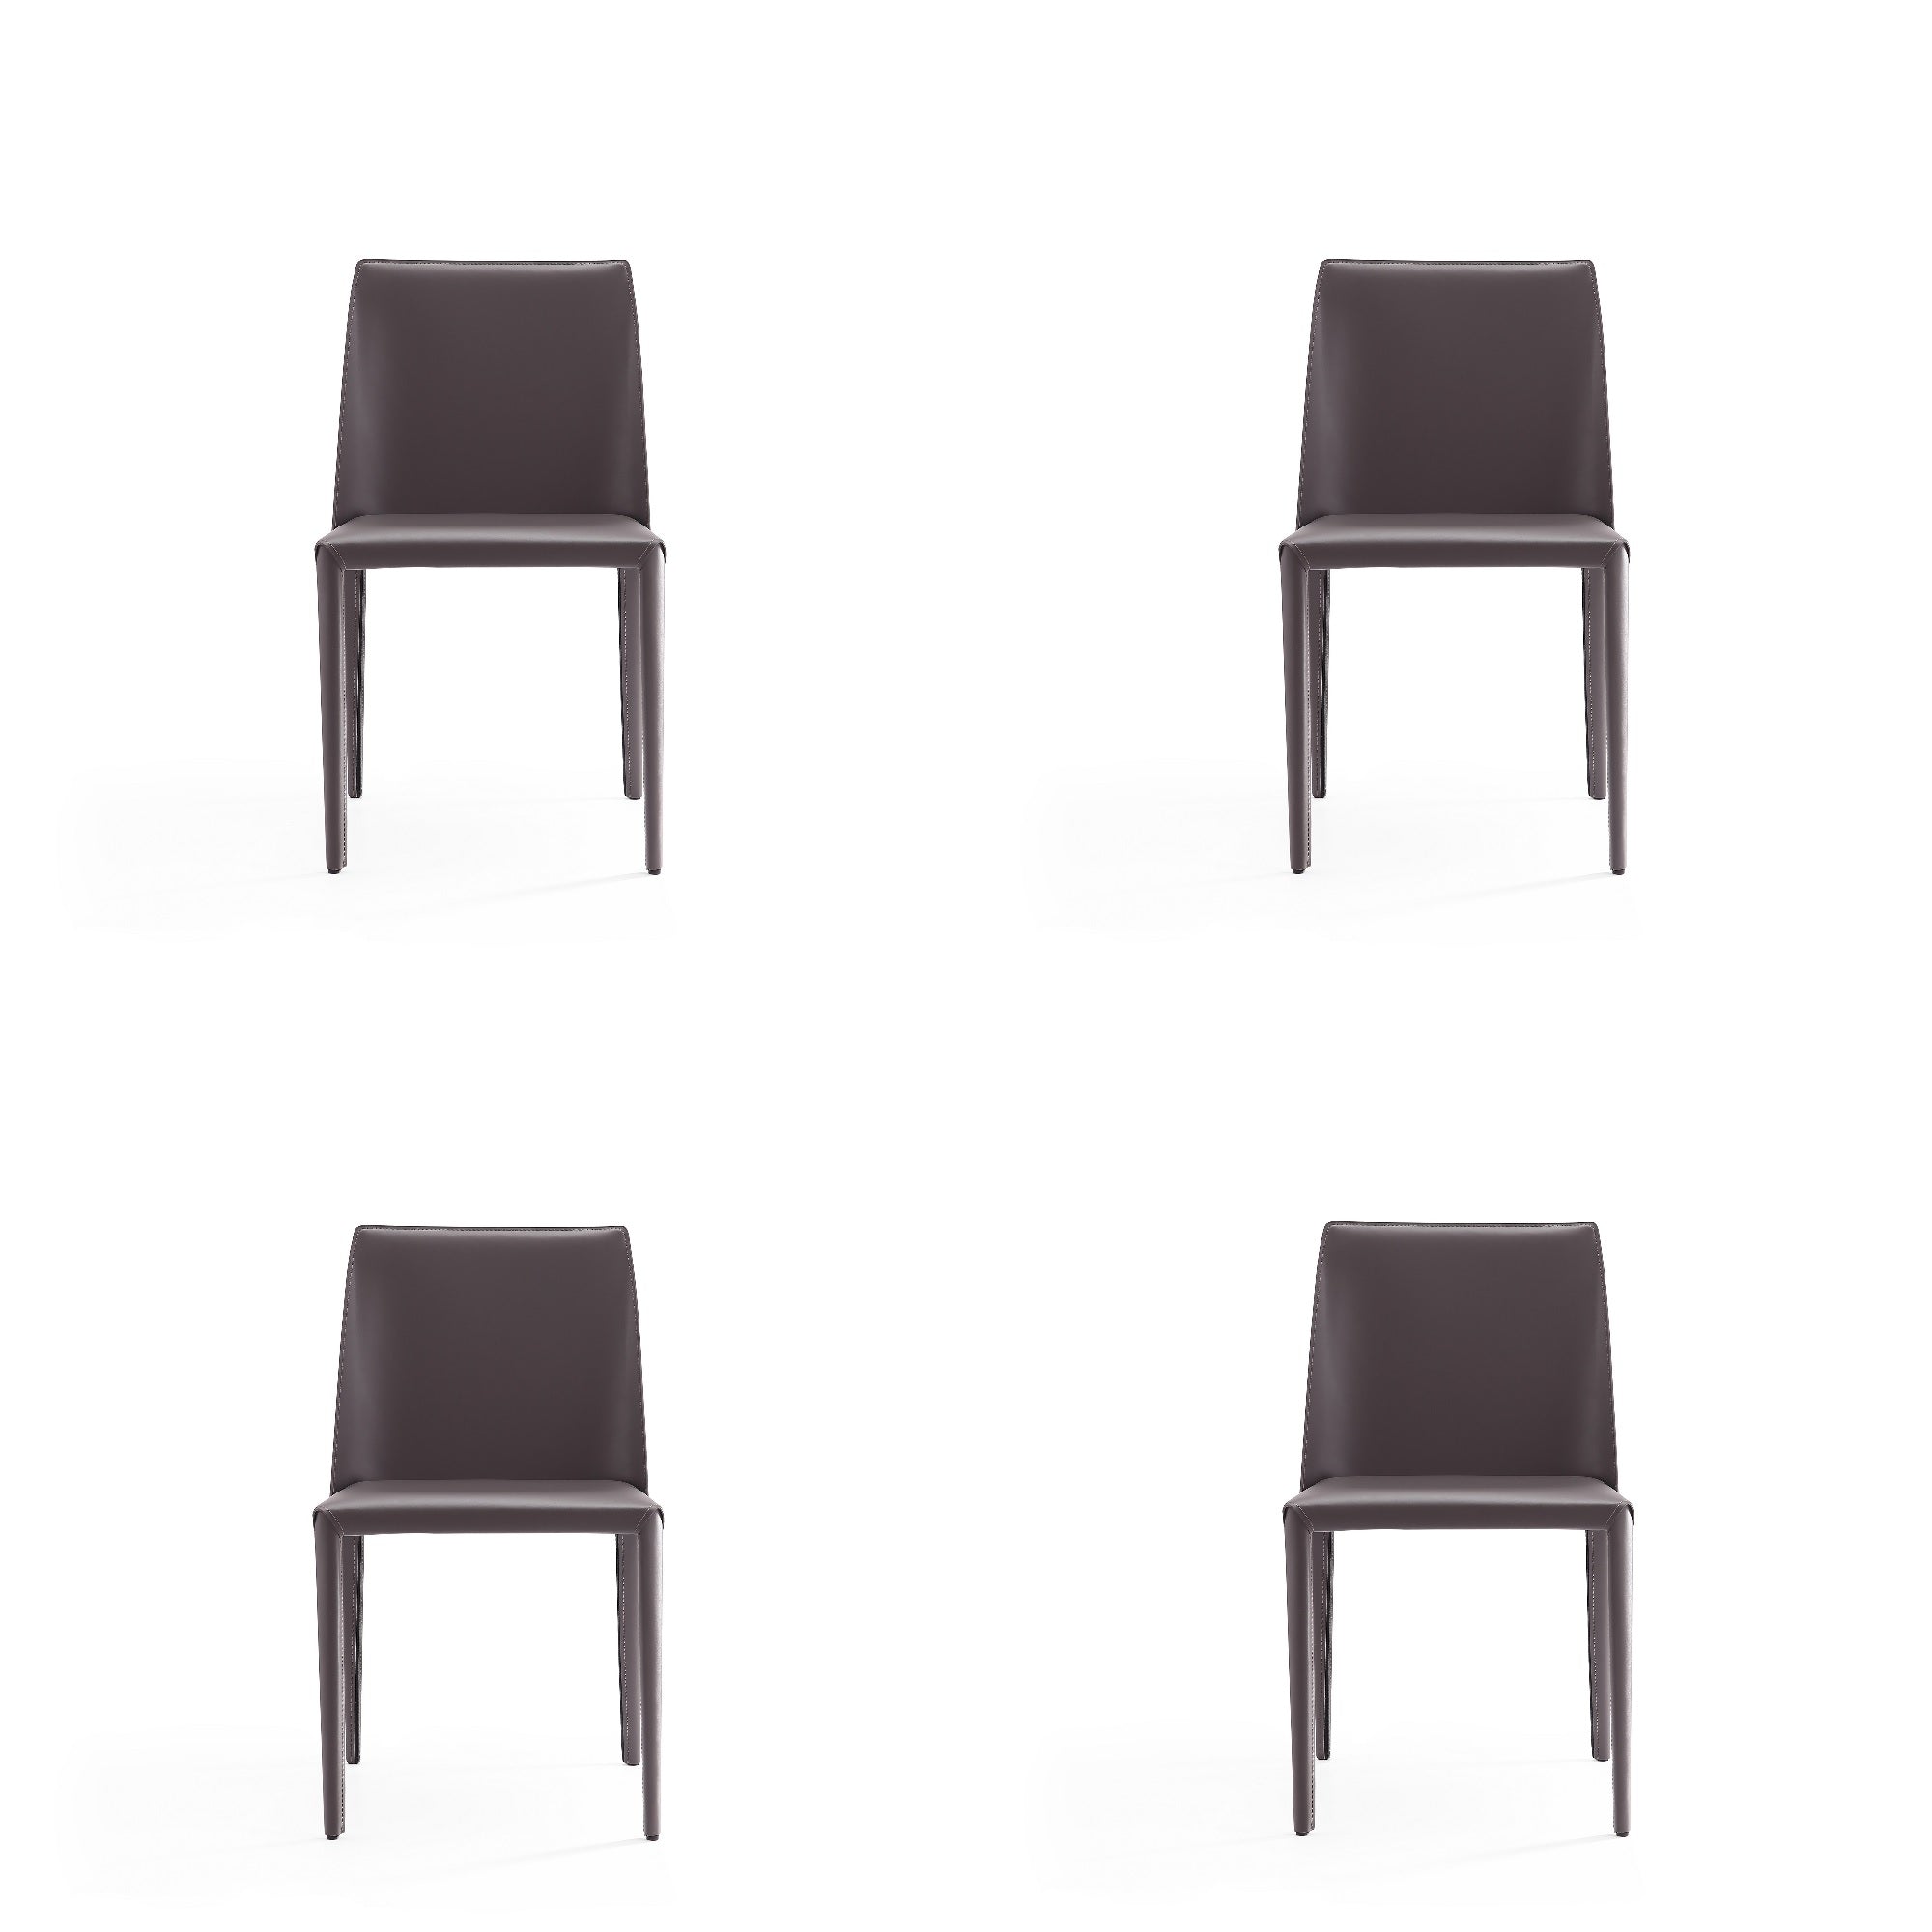 Paris Dining Chair -Set of 4 - East Shore Modern Home Furnishings